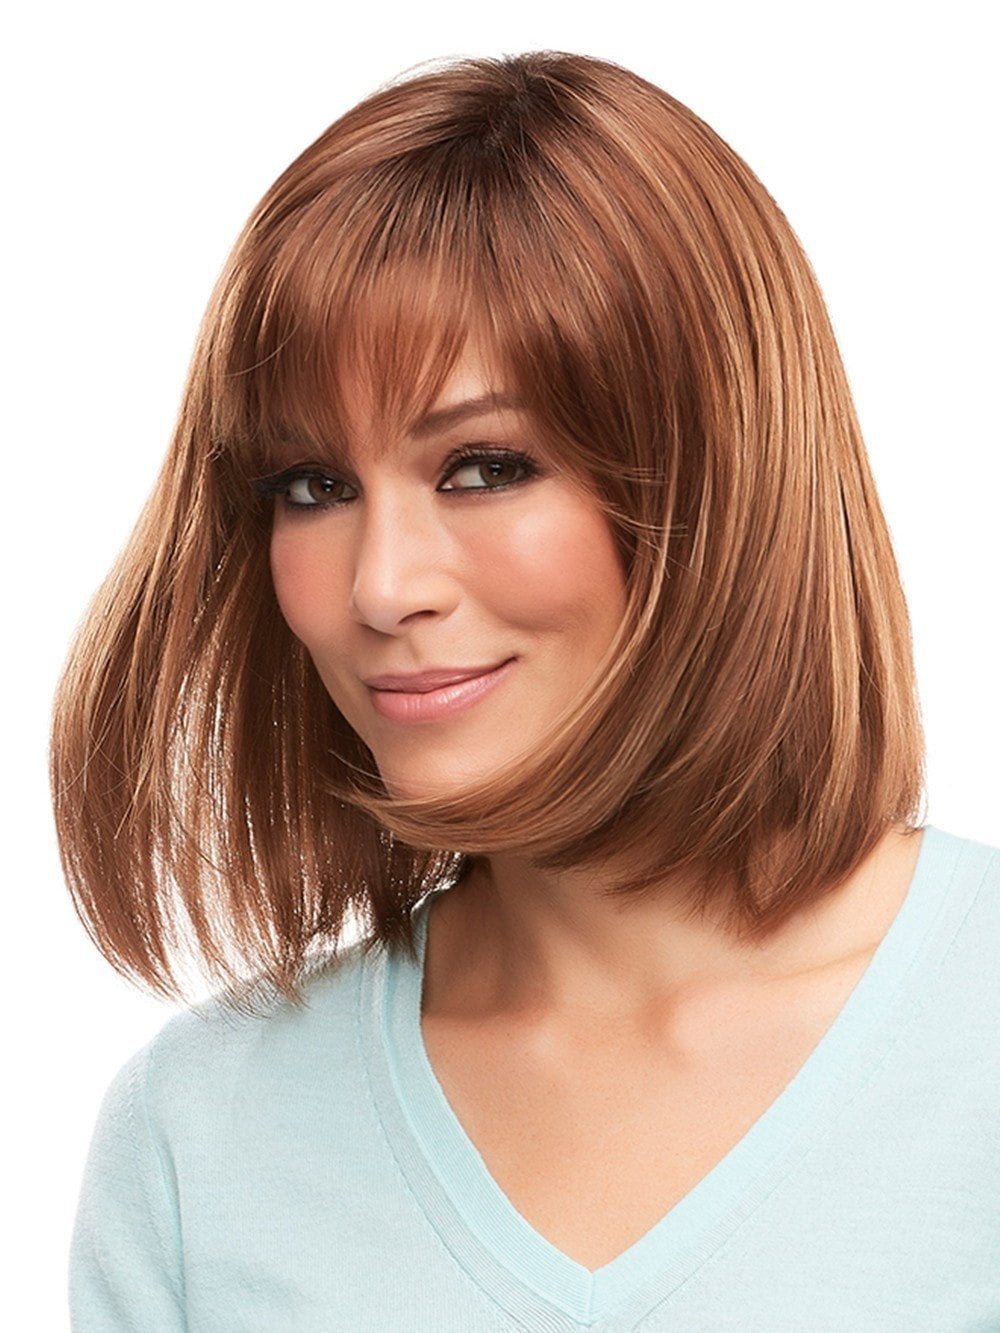 The SmartLace front and monofilament top provide the look of natural hair growth with easy wear ability